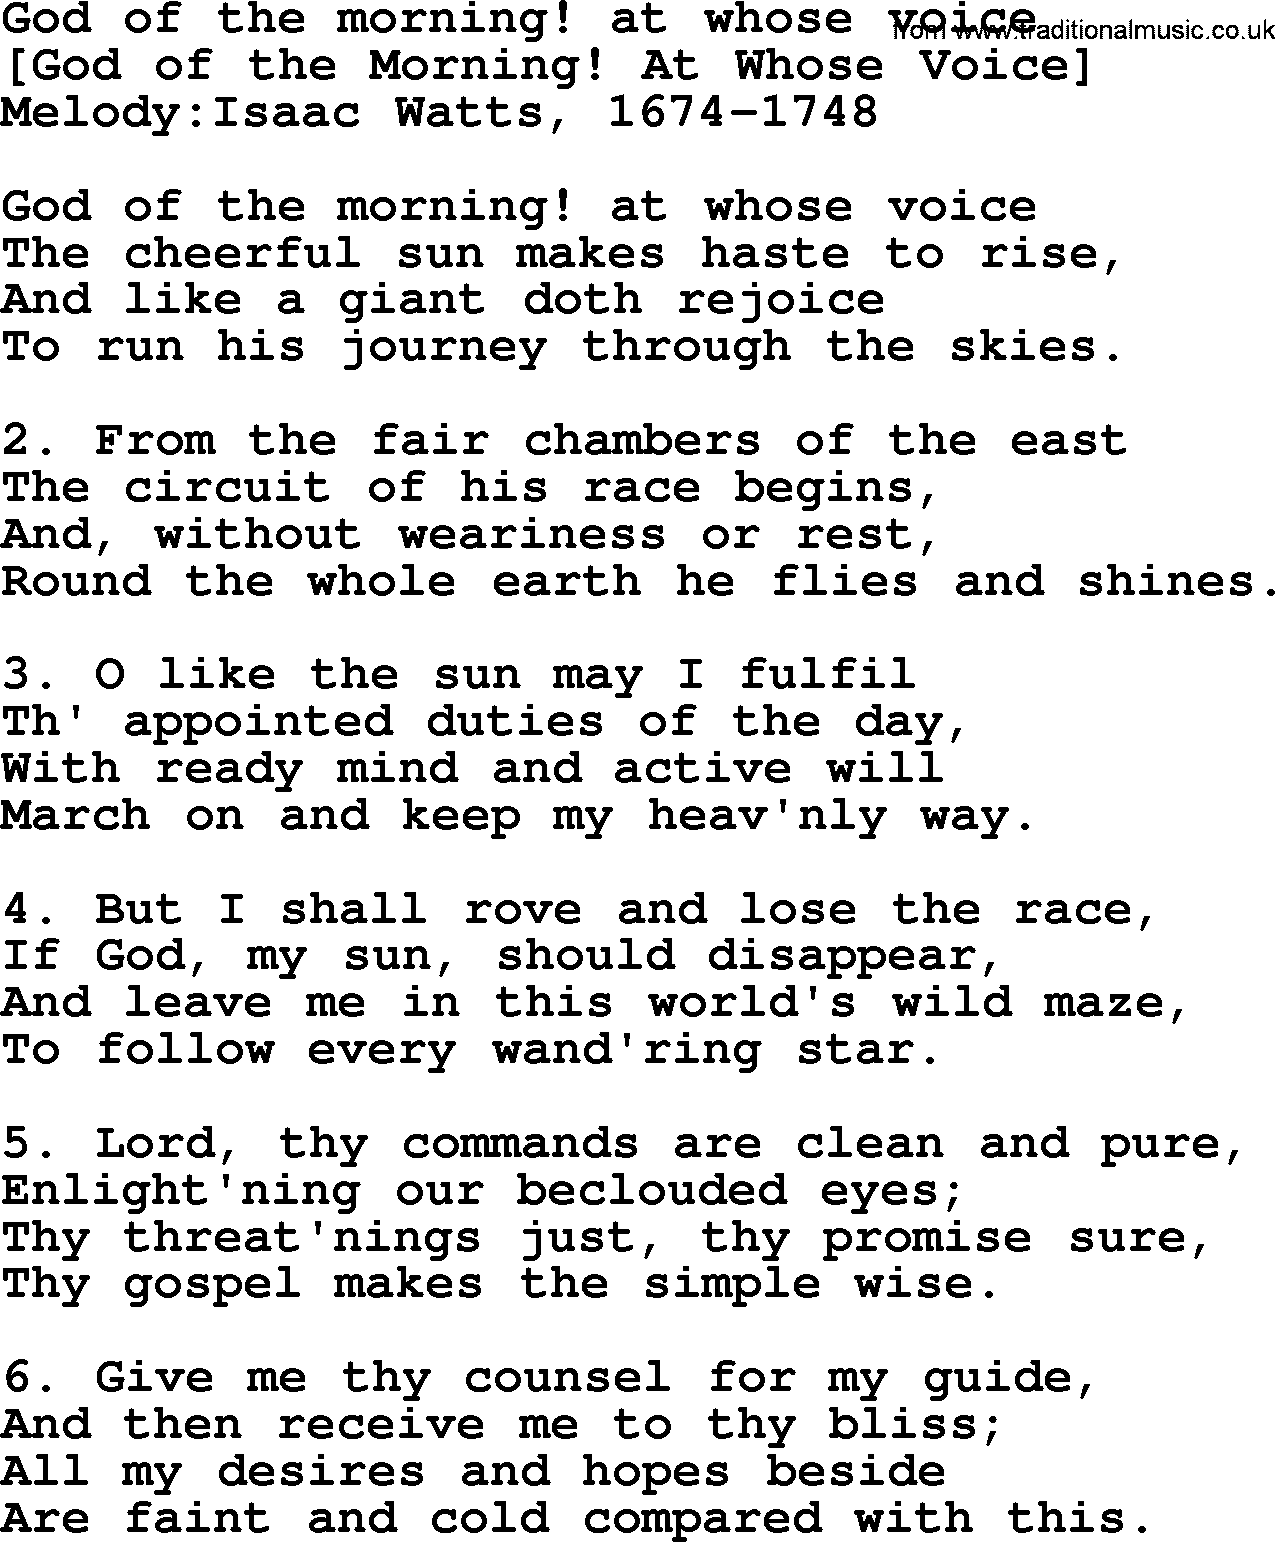 Old English Song: God Of The Morning! At Whose Voice lyrics